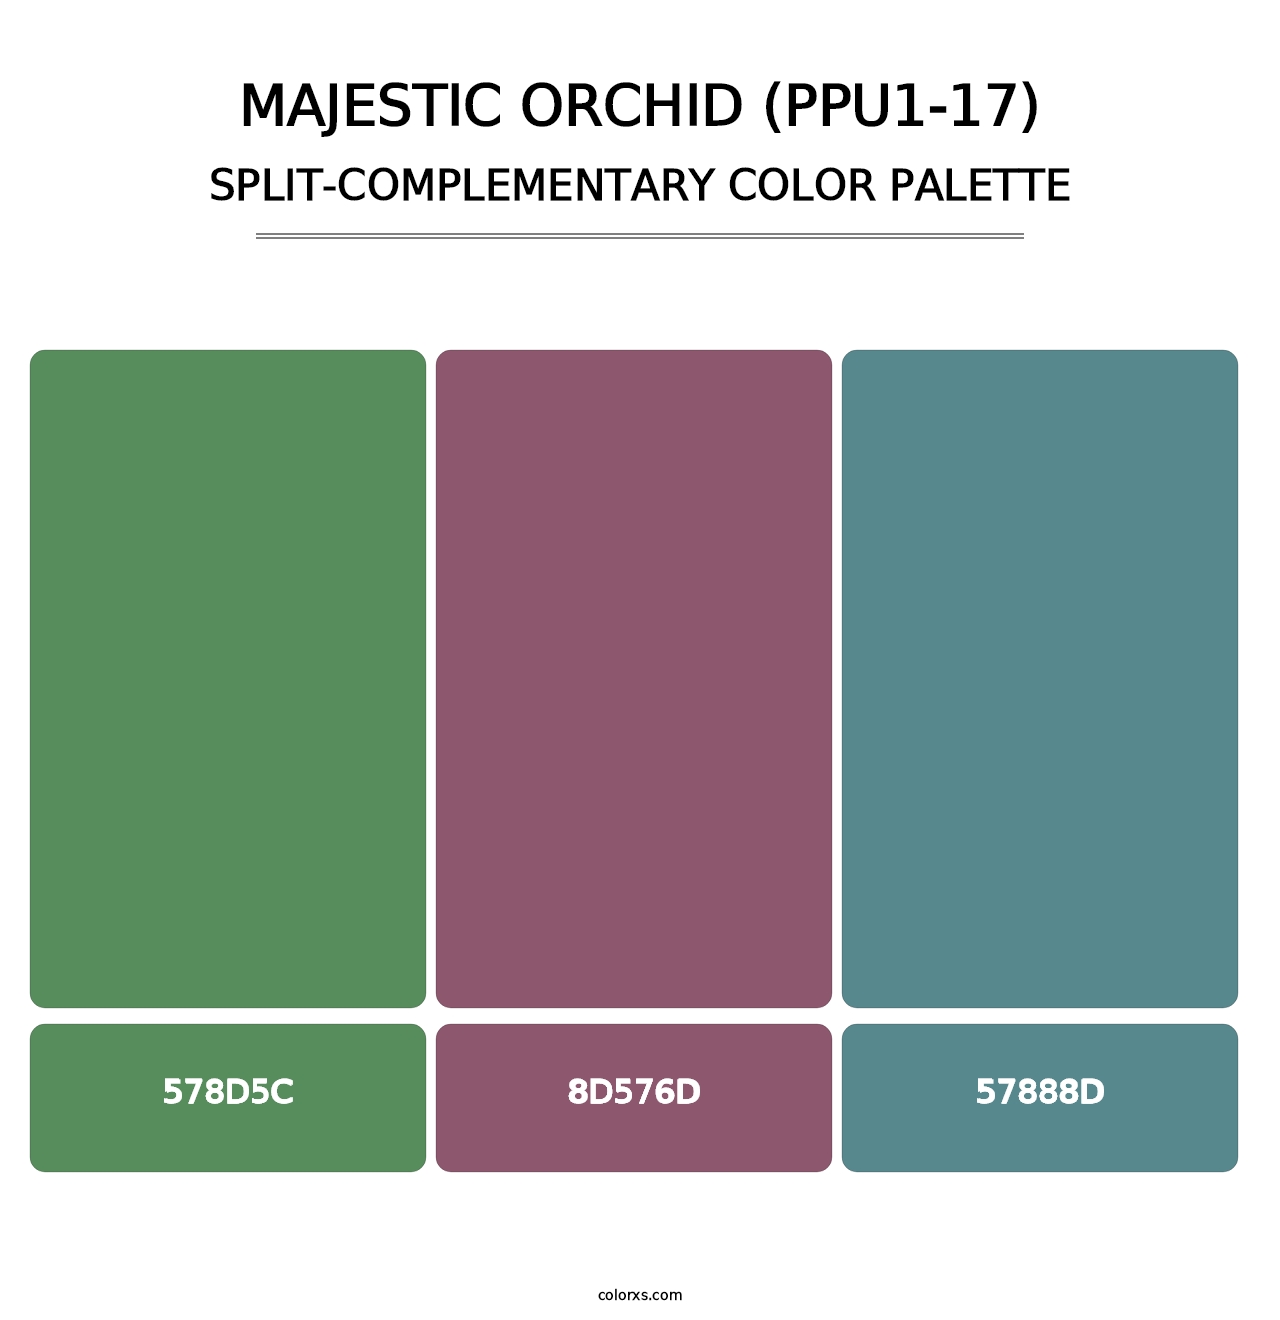 Majestic Orchid (PPU1-17) - Split-Complementary Color Palette